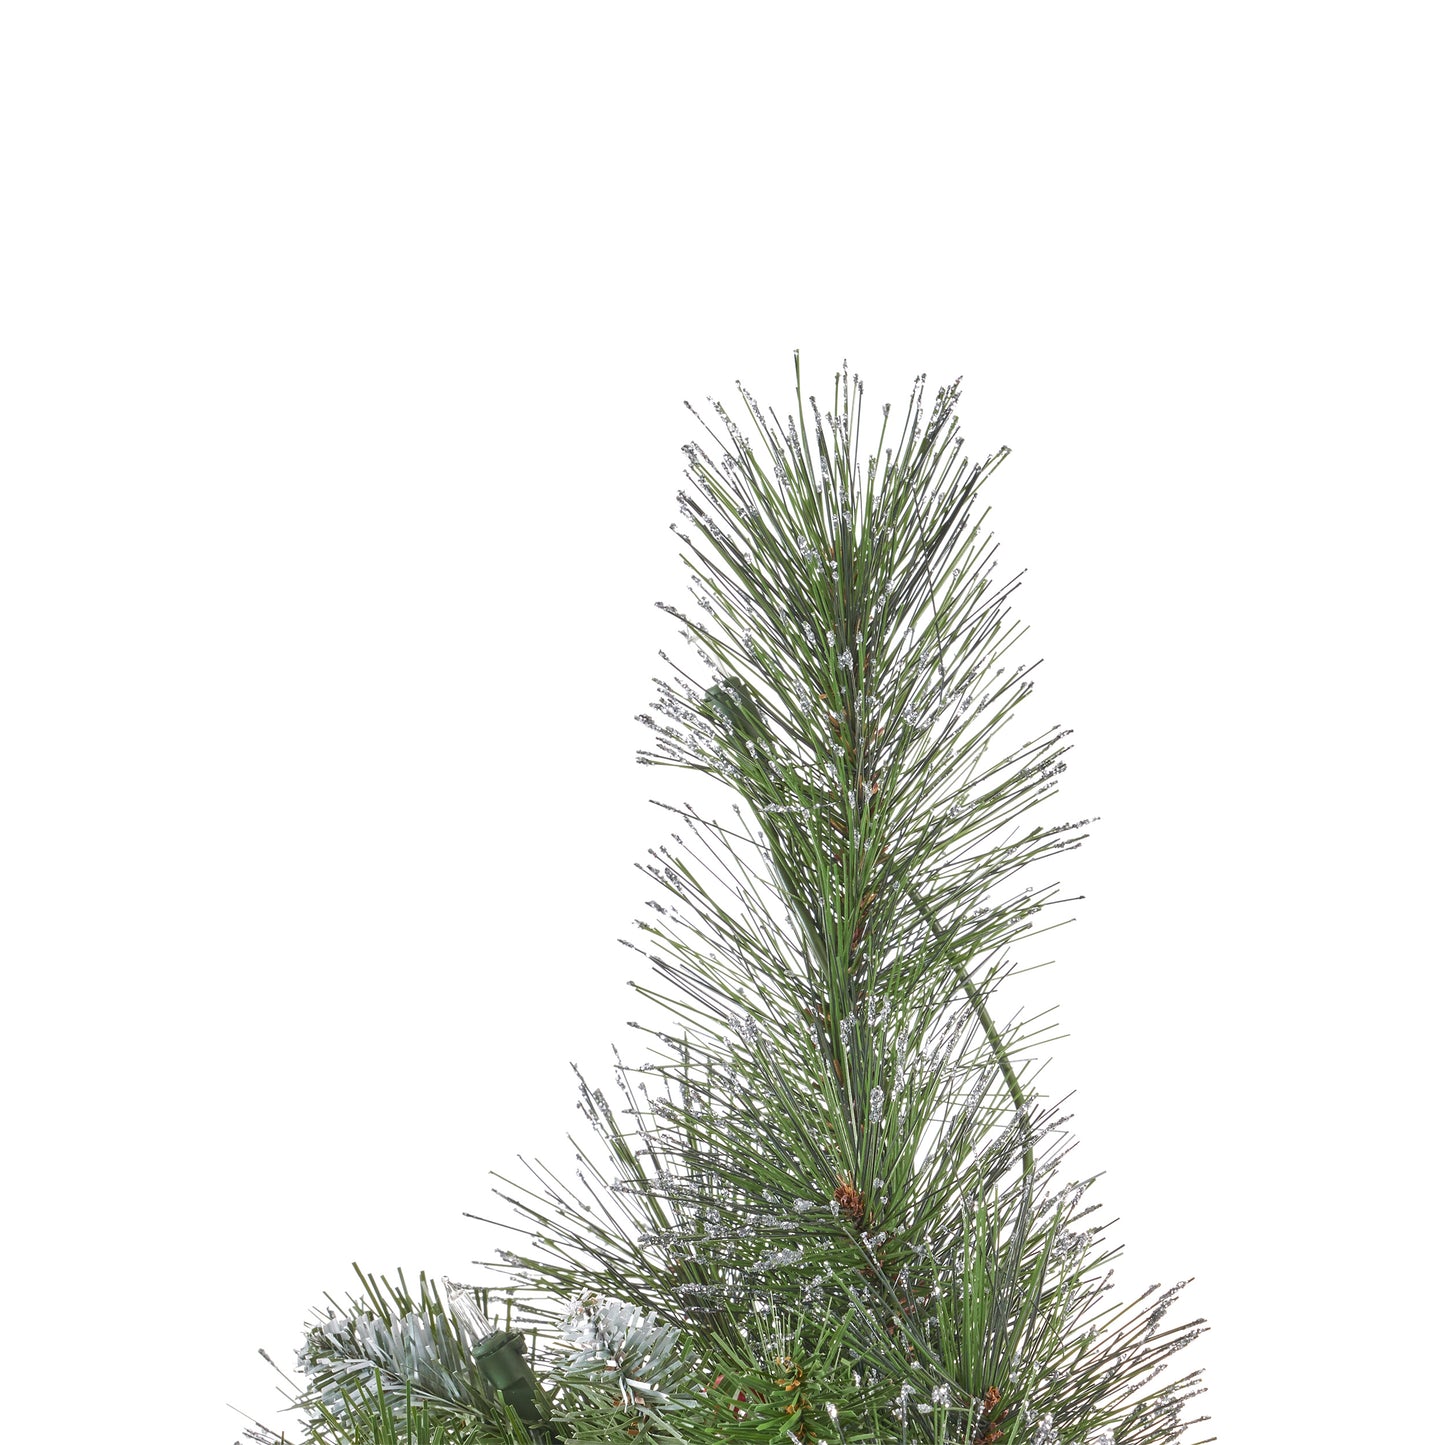 7-foot Mixed Spruce Hinged Artificial Christmas Tree with Glitter Branches, Red Berries, and Pinecones